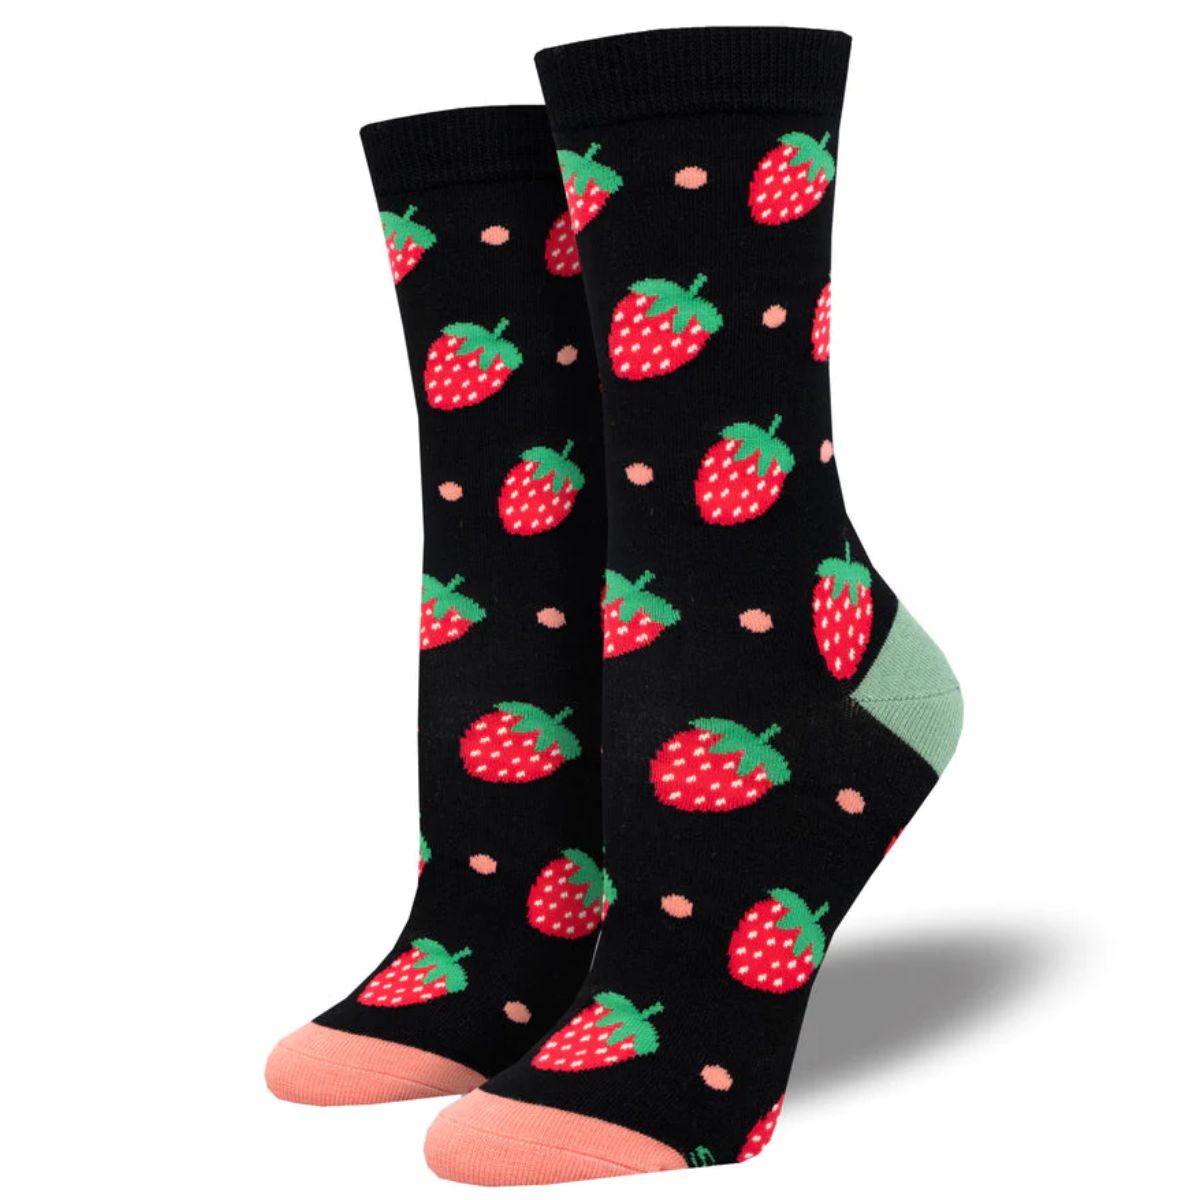 Strawberry delight socks a pair of black socks with strawberry print. 